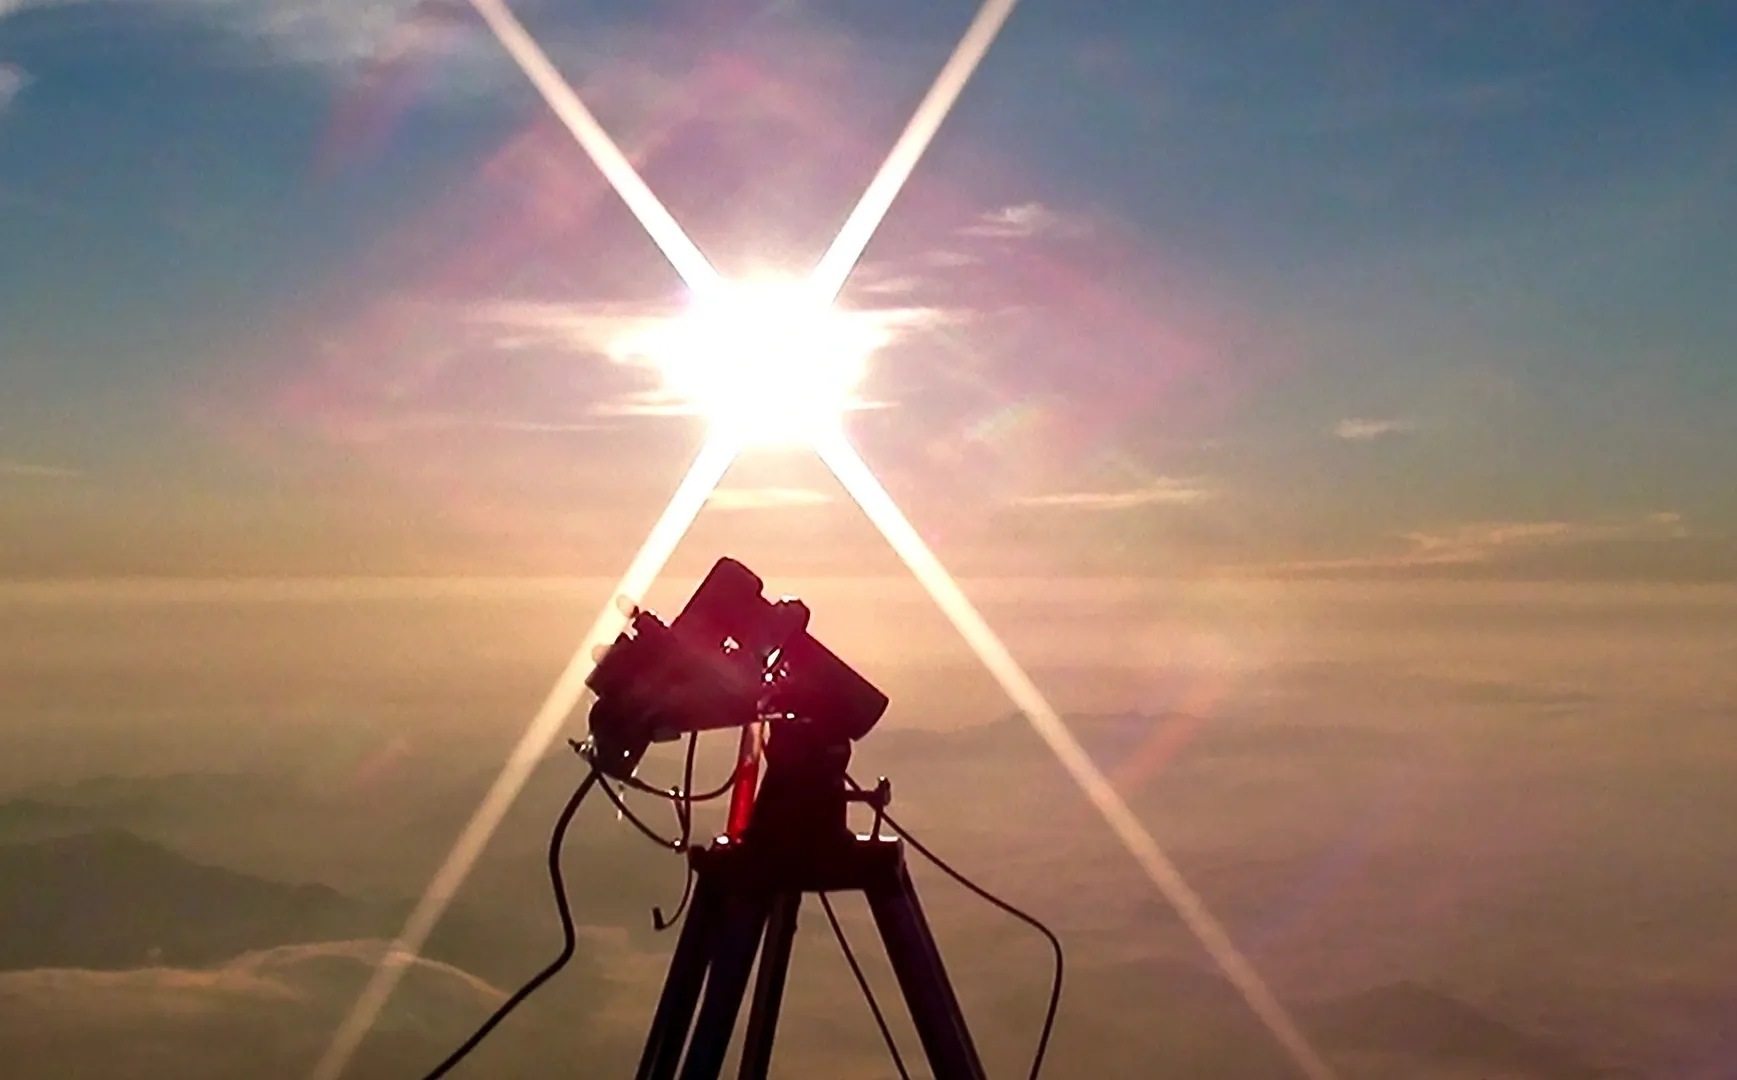 A telescope is shown with the sun shining.